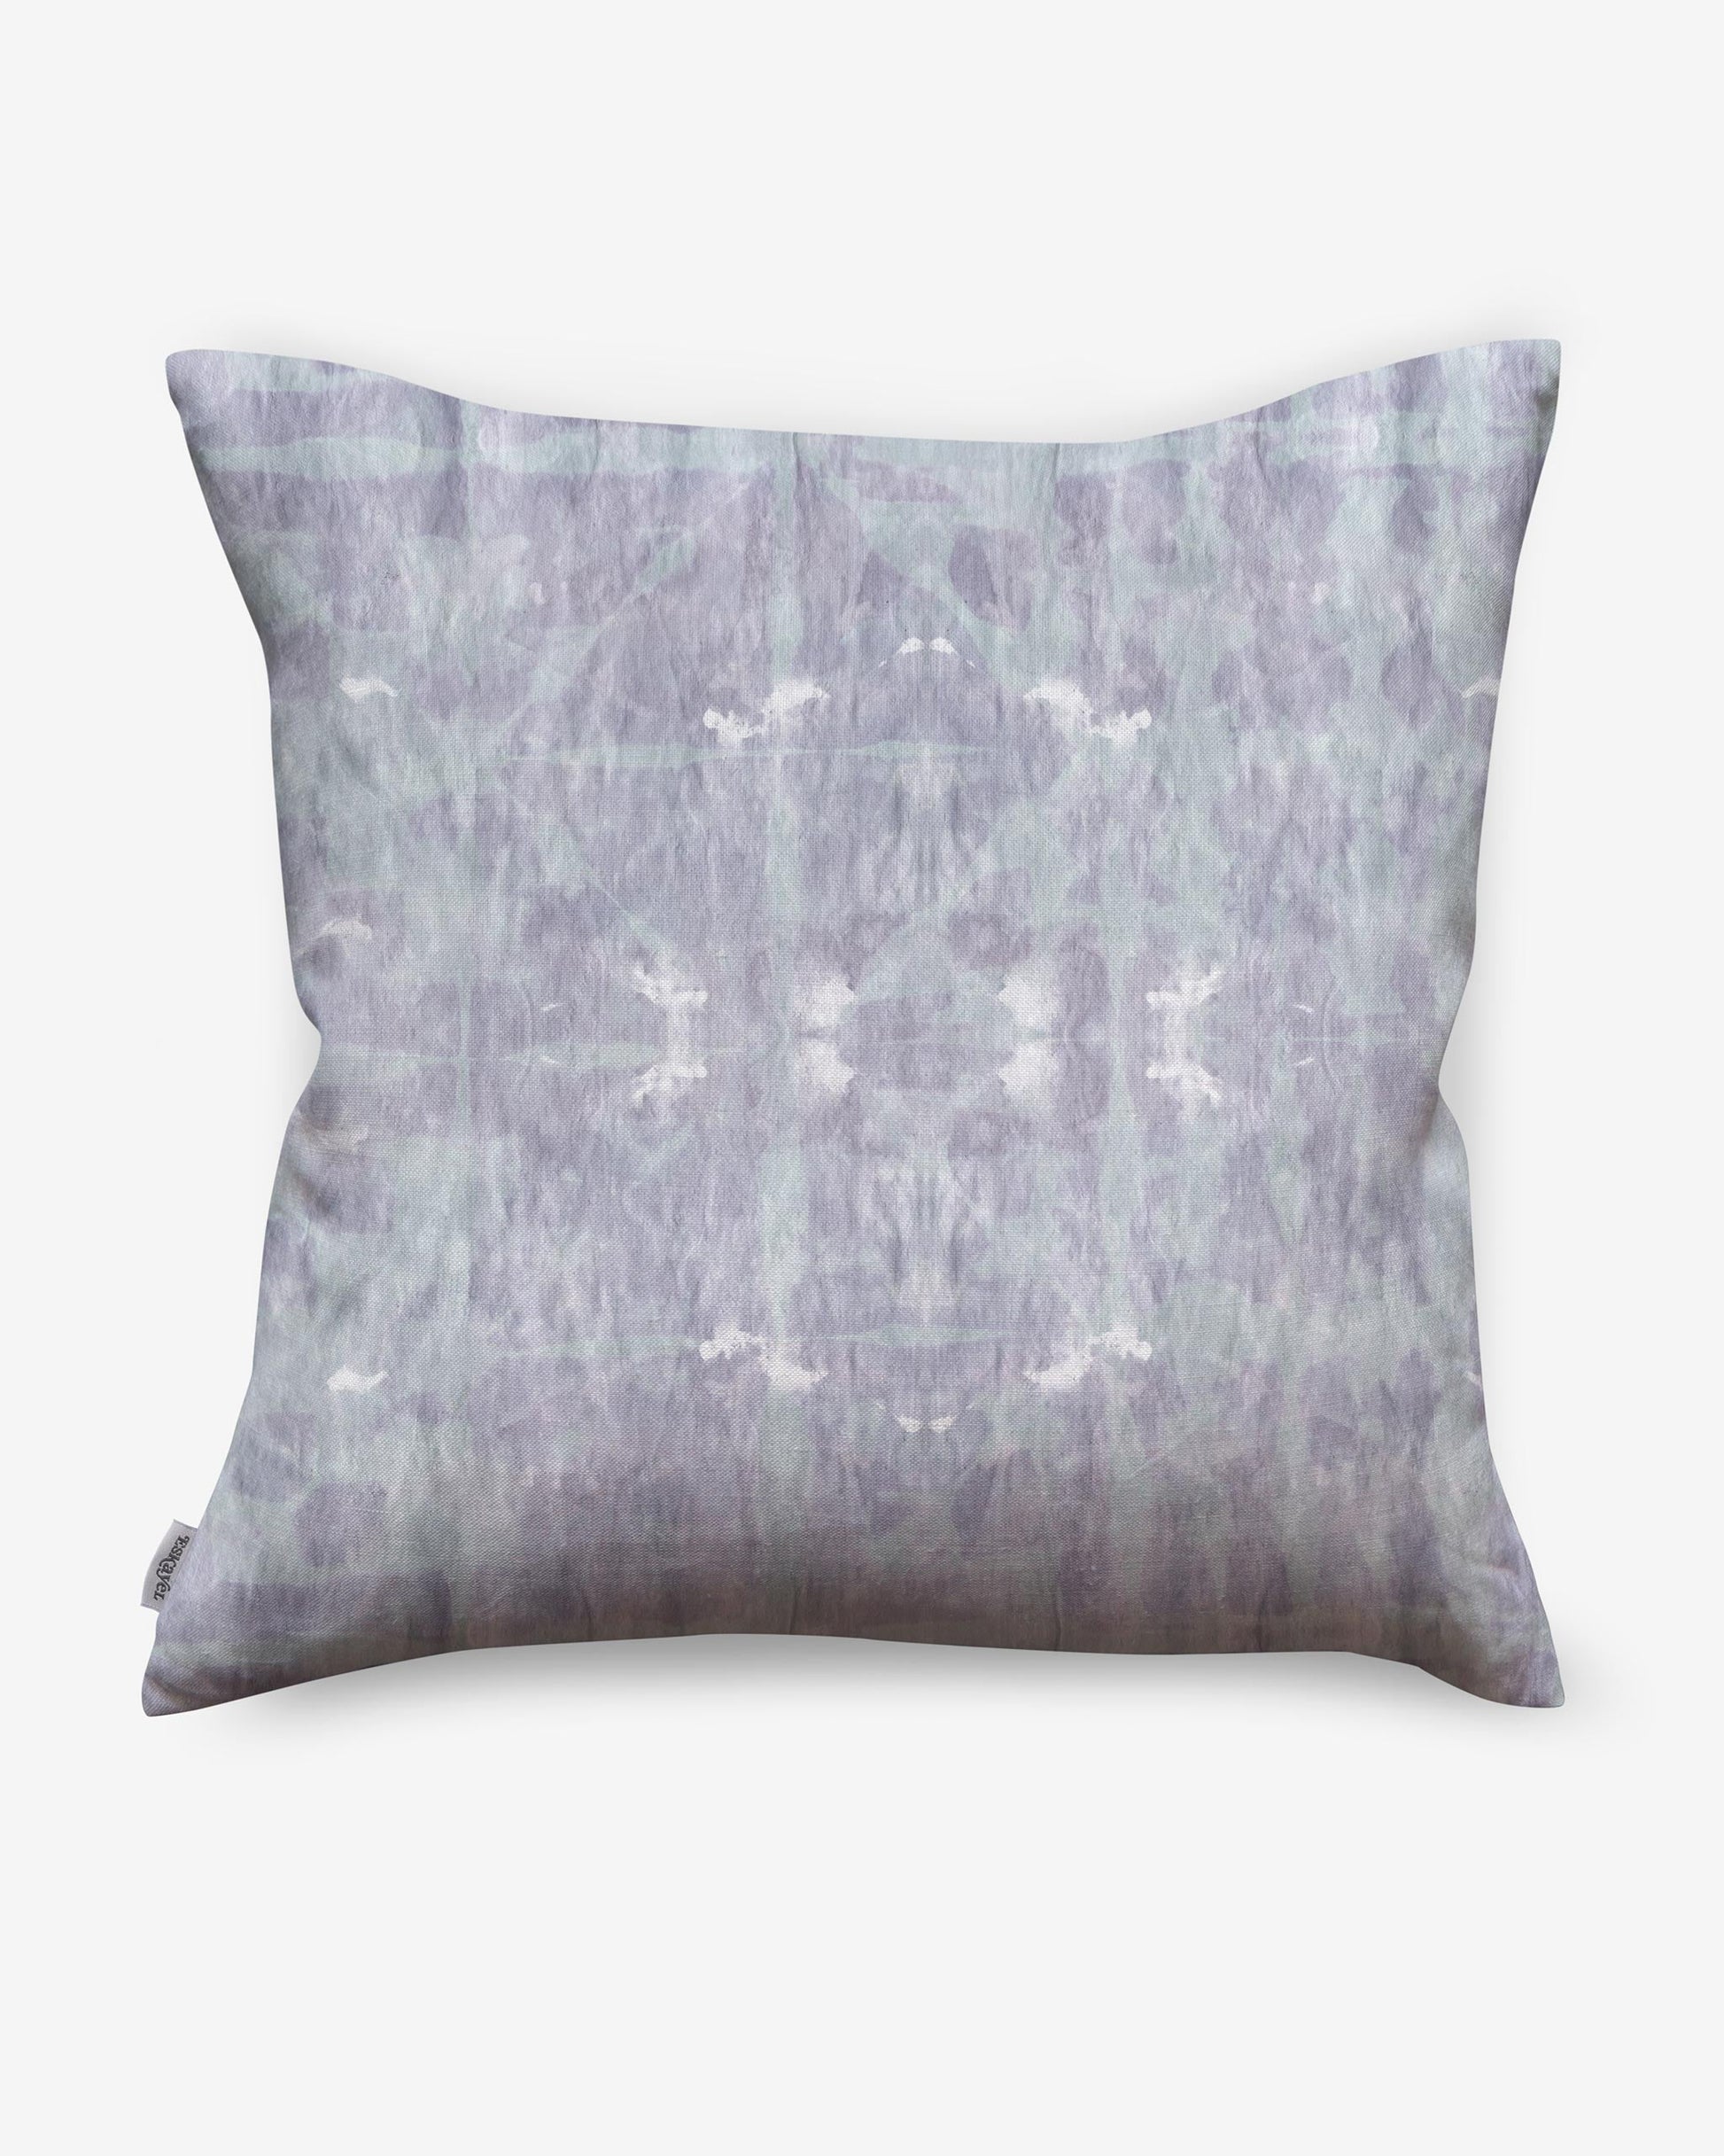 A pillow with a blue and white Banda Pillow Cay pattern on it